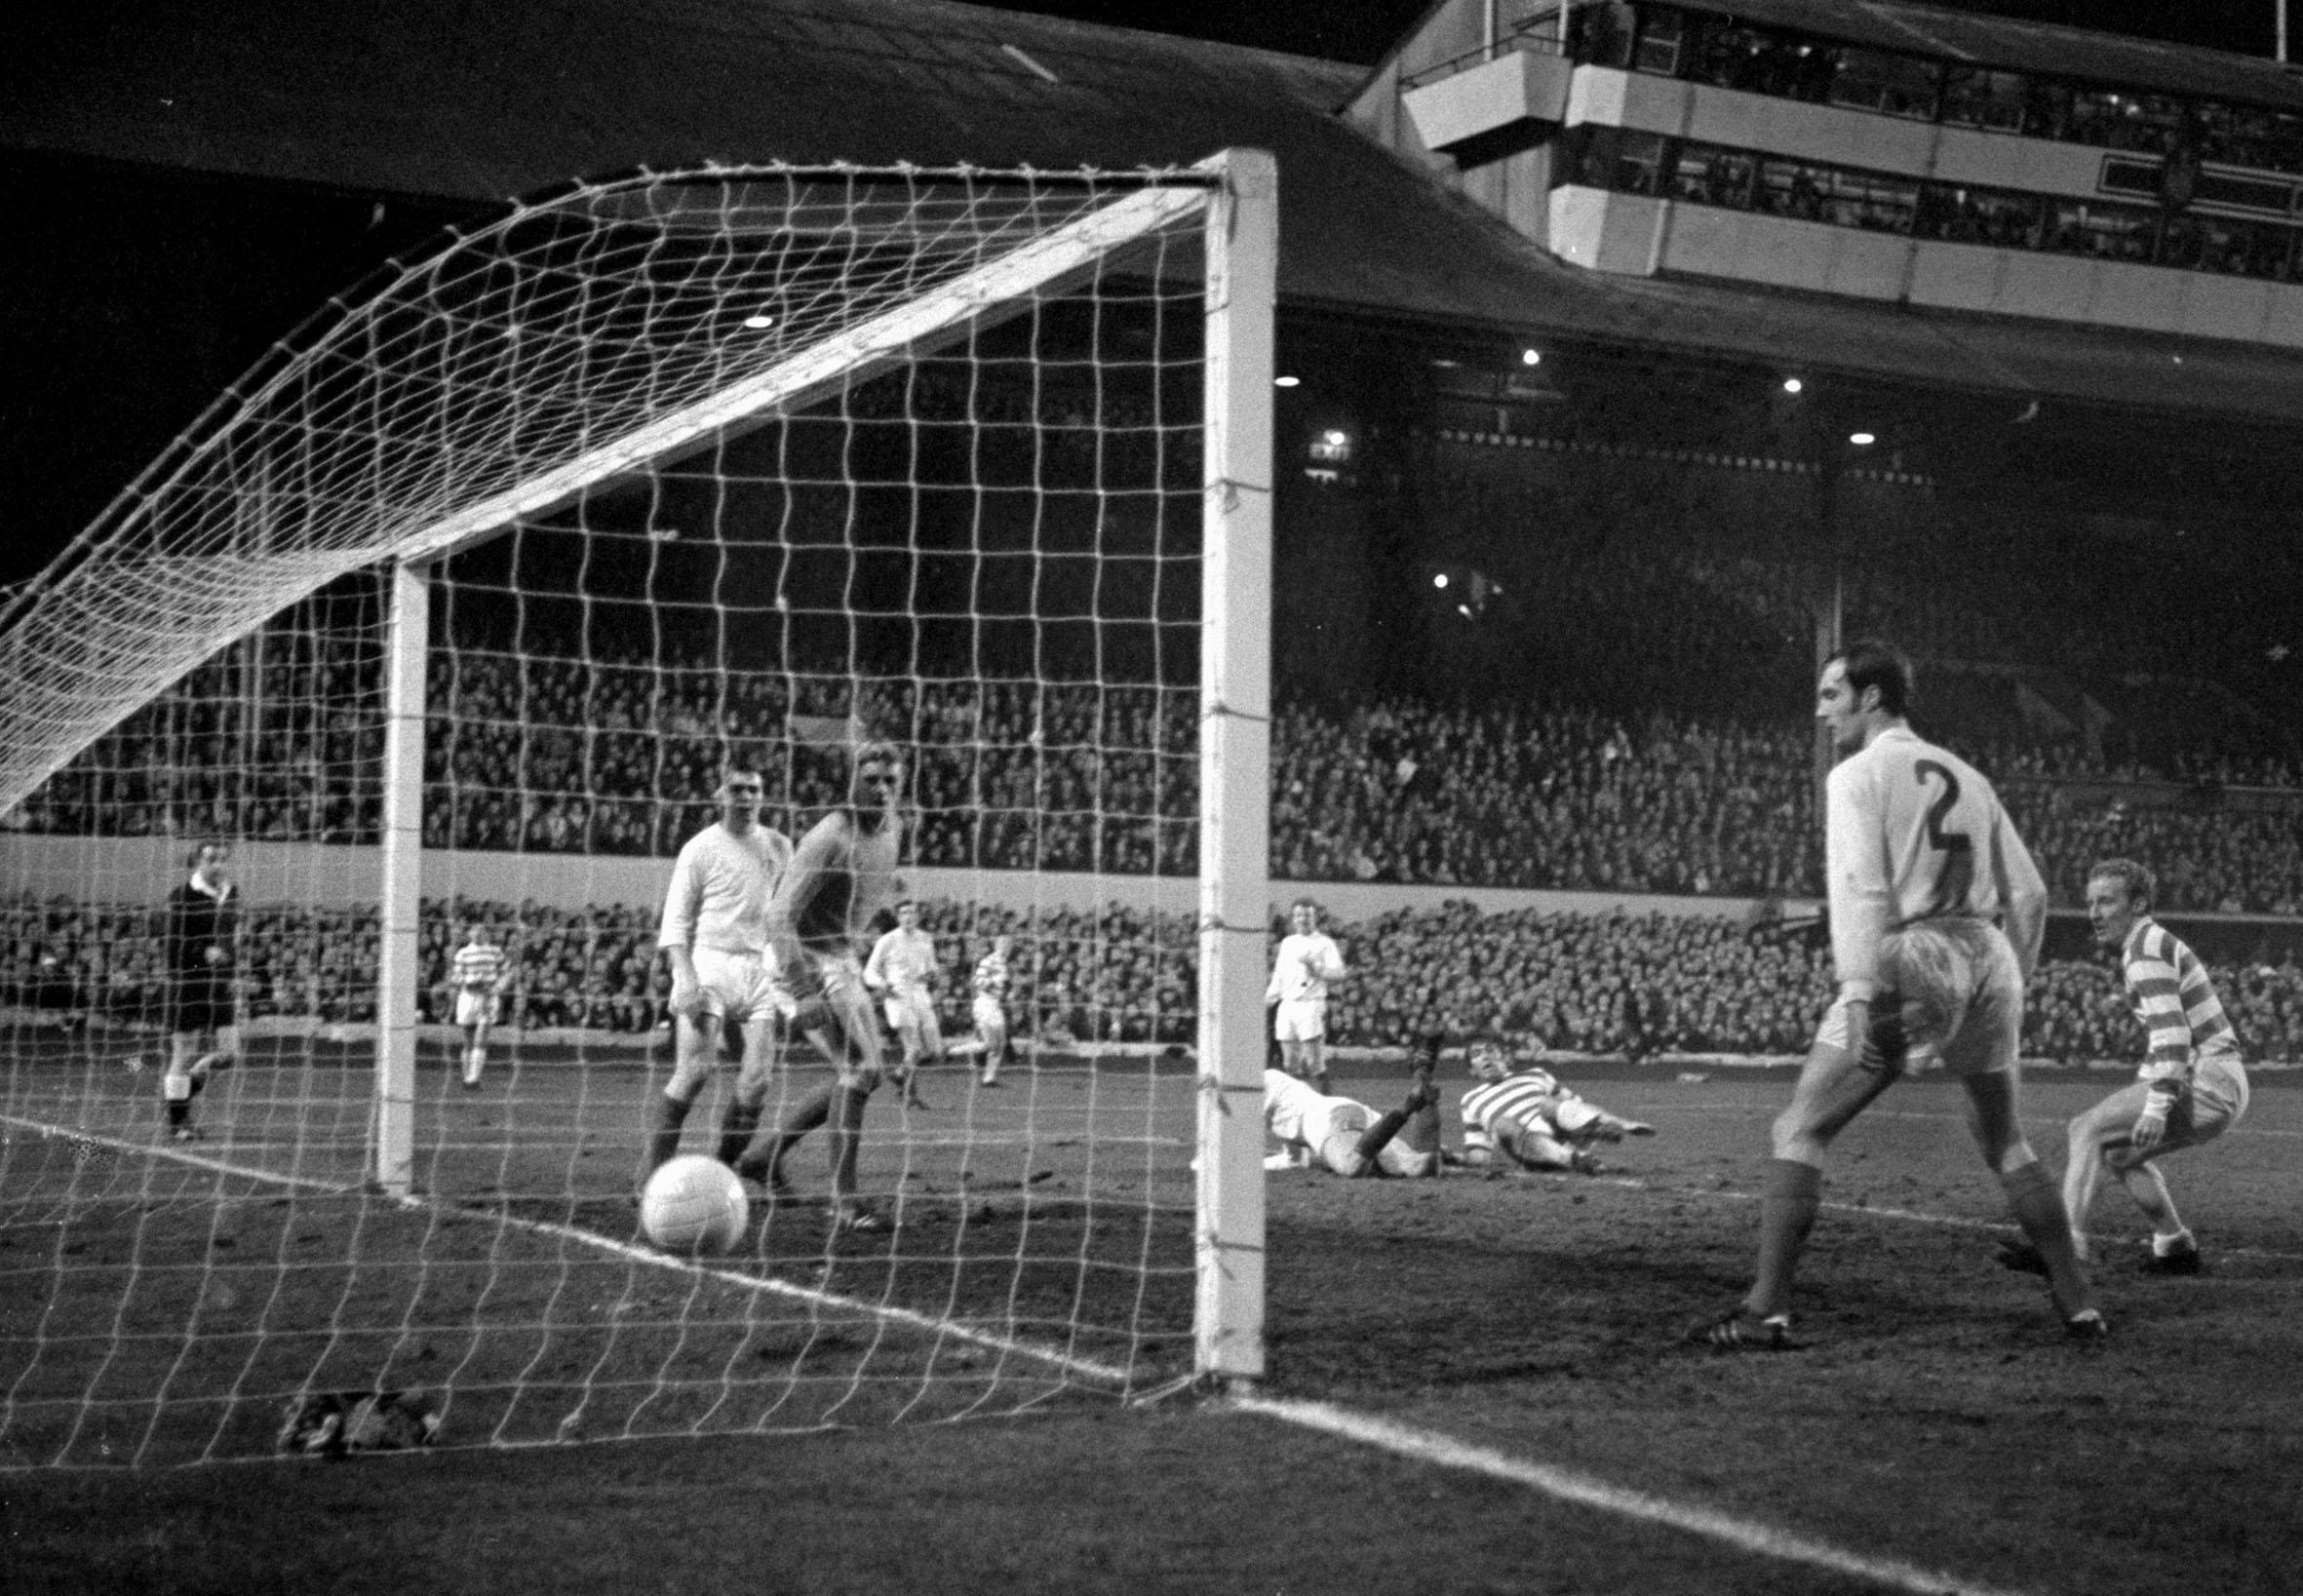 John Hughes scores the equaliser at the Celtic End in the 1970 European Cup semi-final